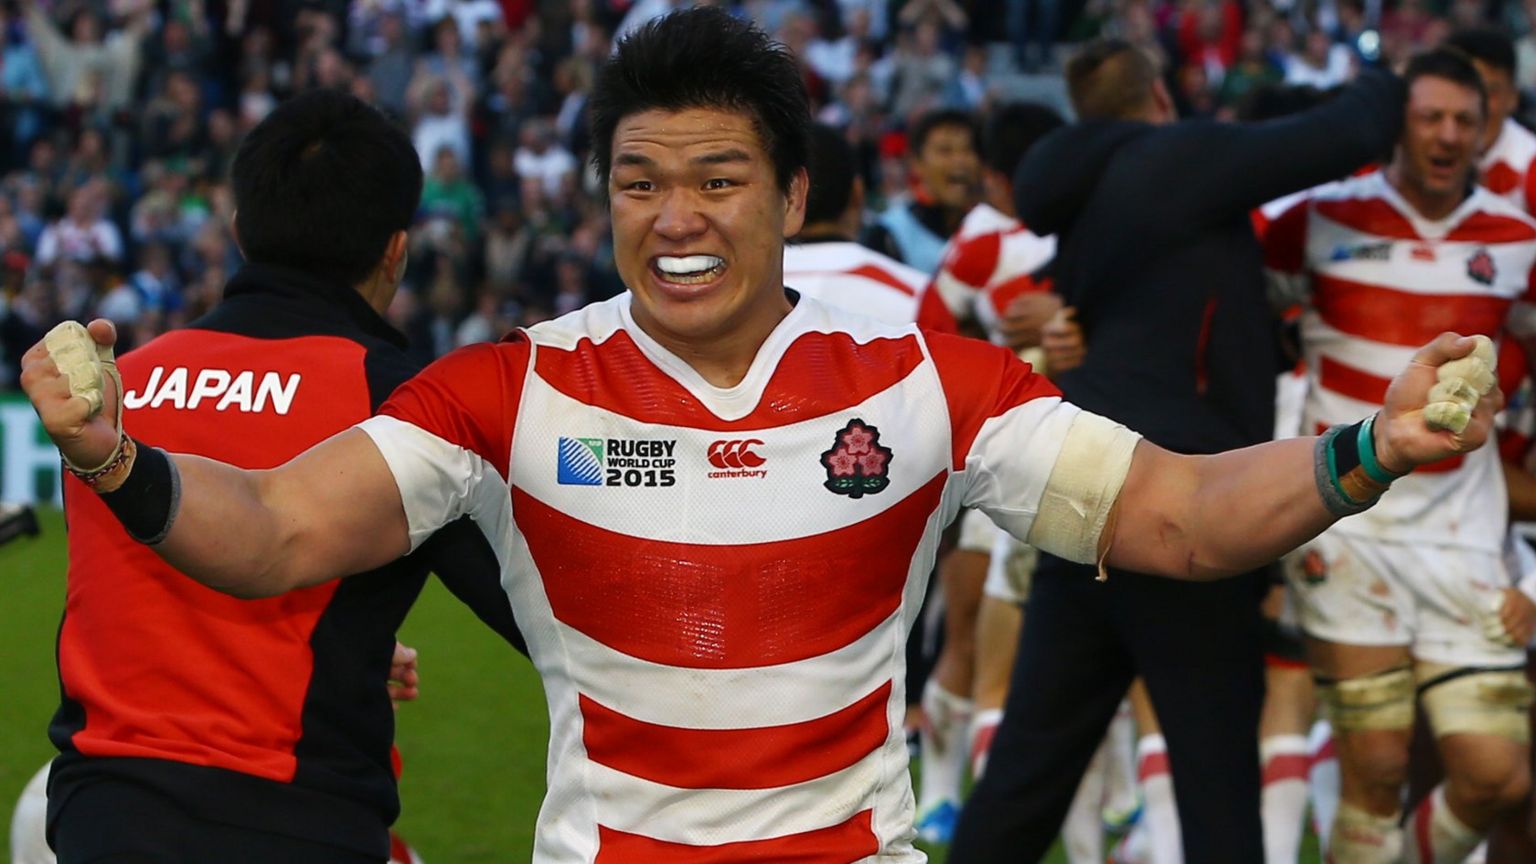 Japan celebrate their Rugby World Cup win over South Africa